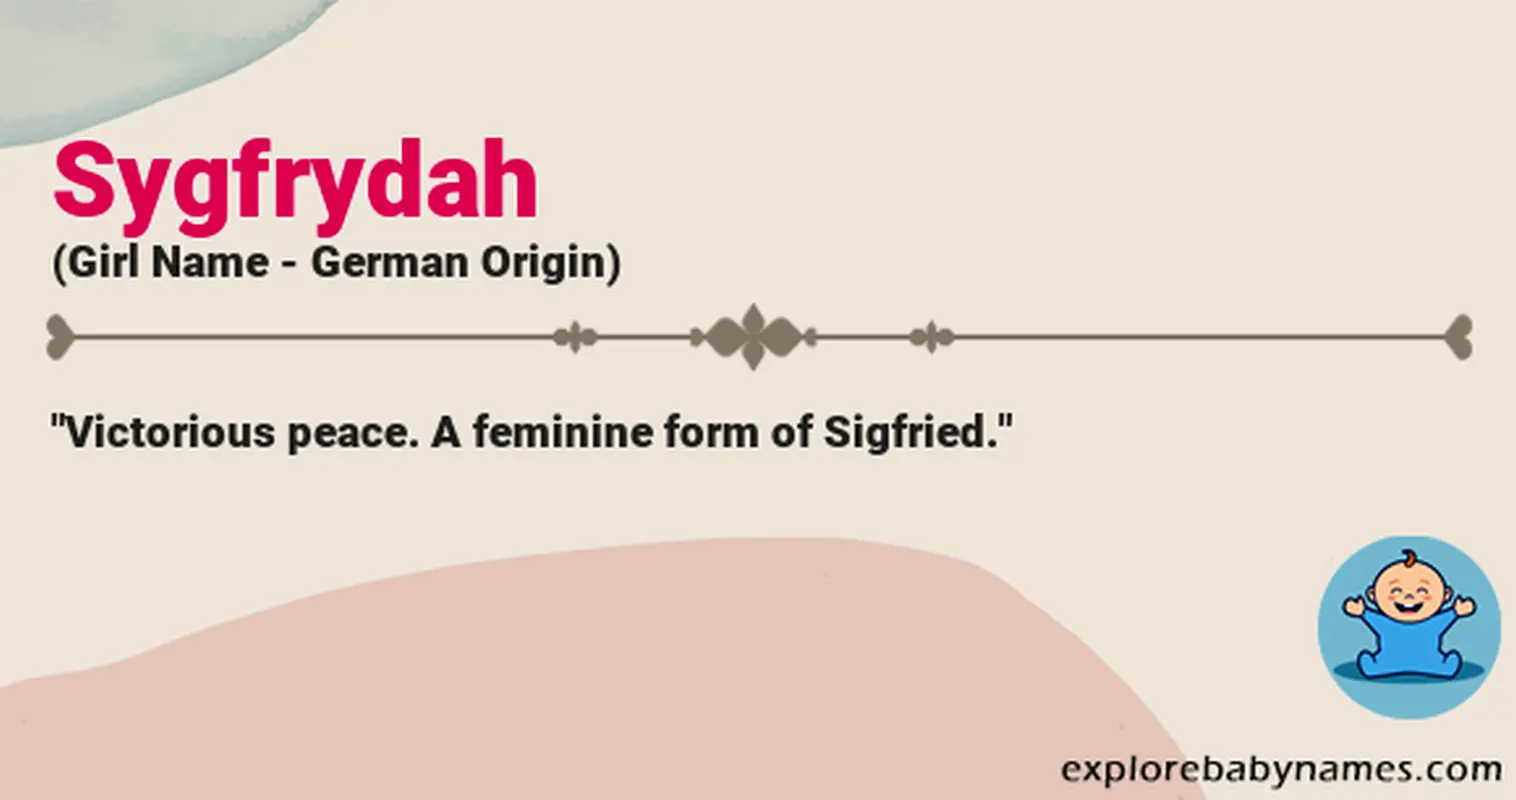 Meaning of Sygfrydah